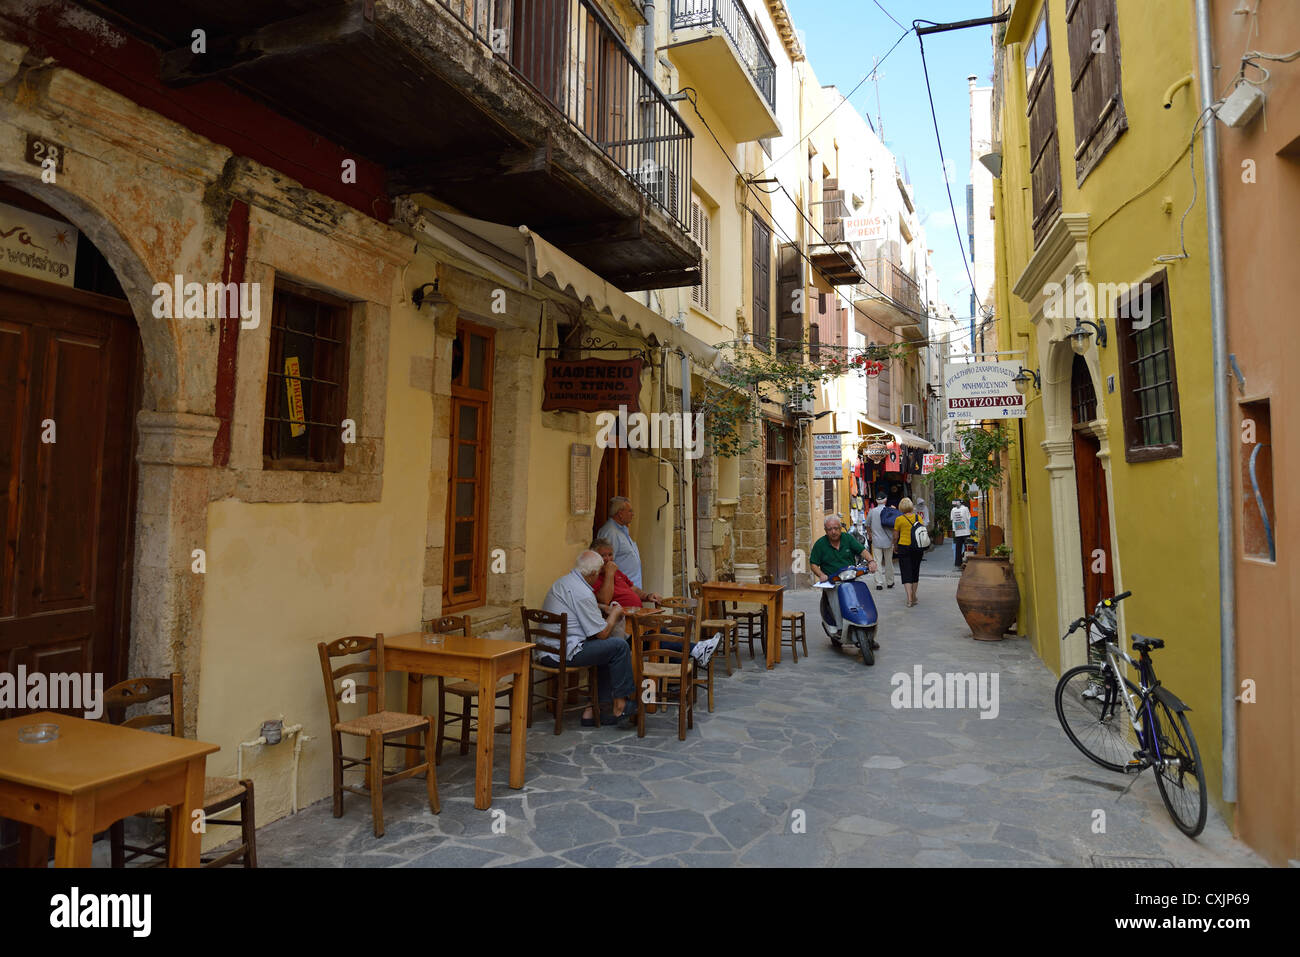 View of street in Old Town, Chania, Chania Prefecture, Crete, Greece Stock Photo